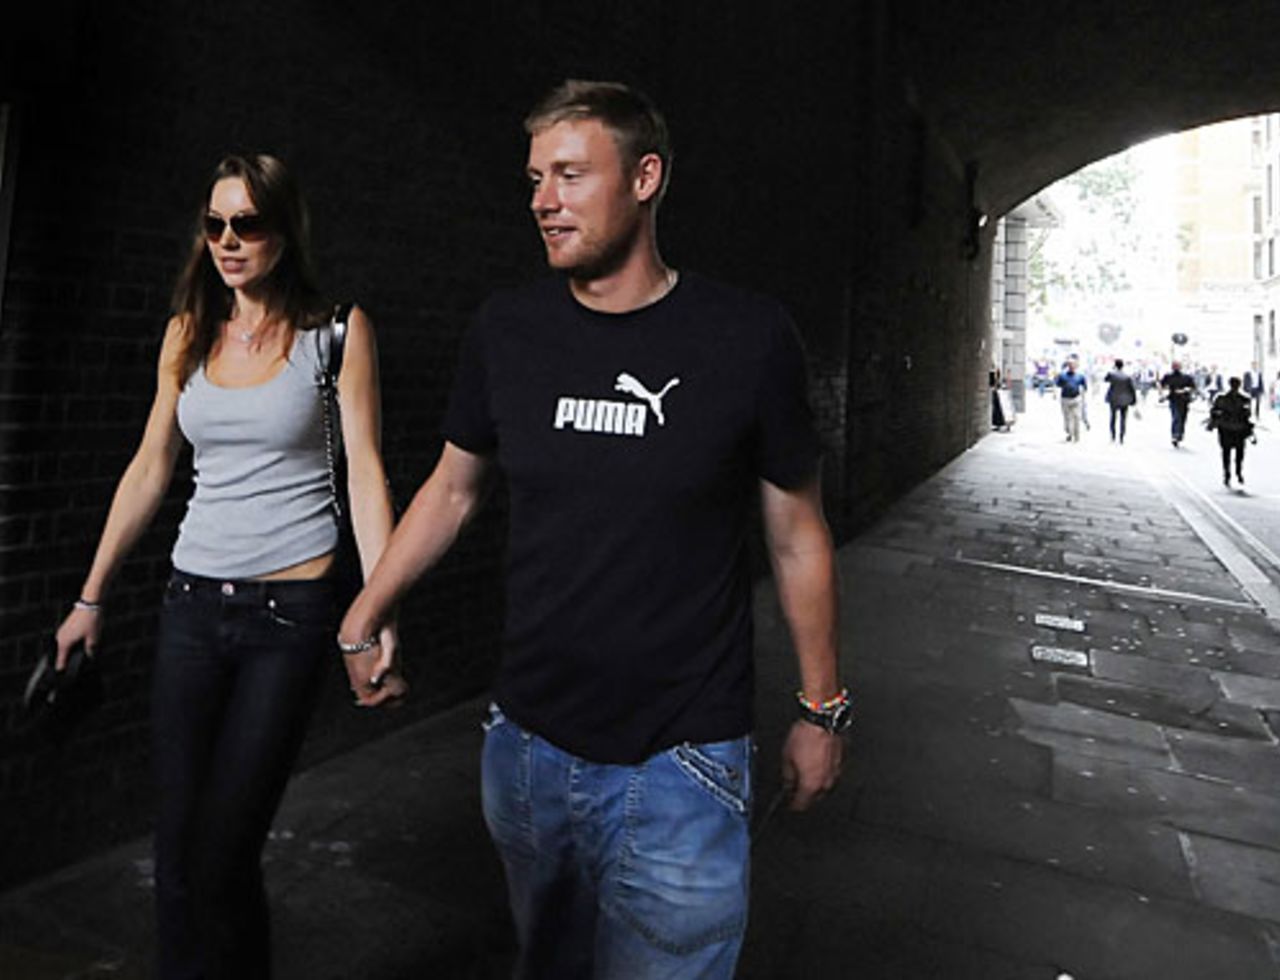 Andrew Flintoff and wife Rachael walk through the streets, London, August 24, 2009